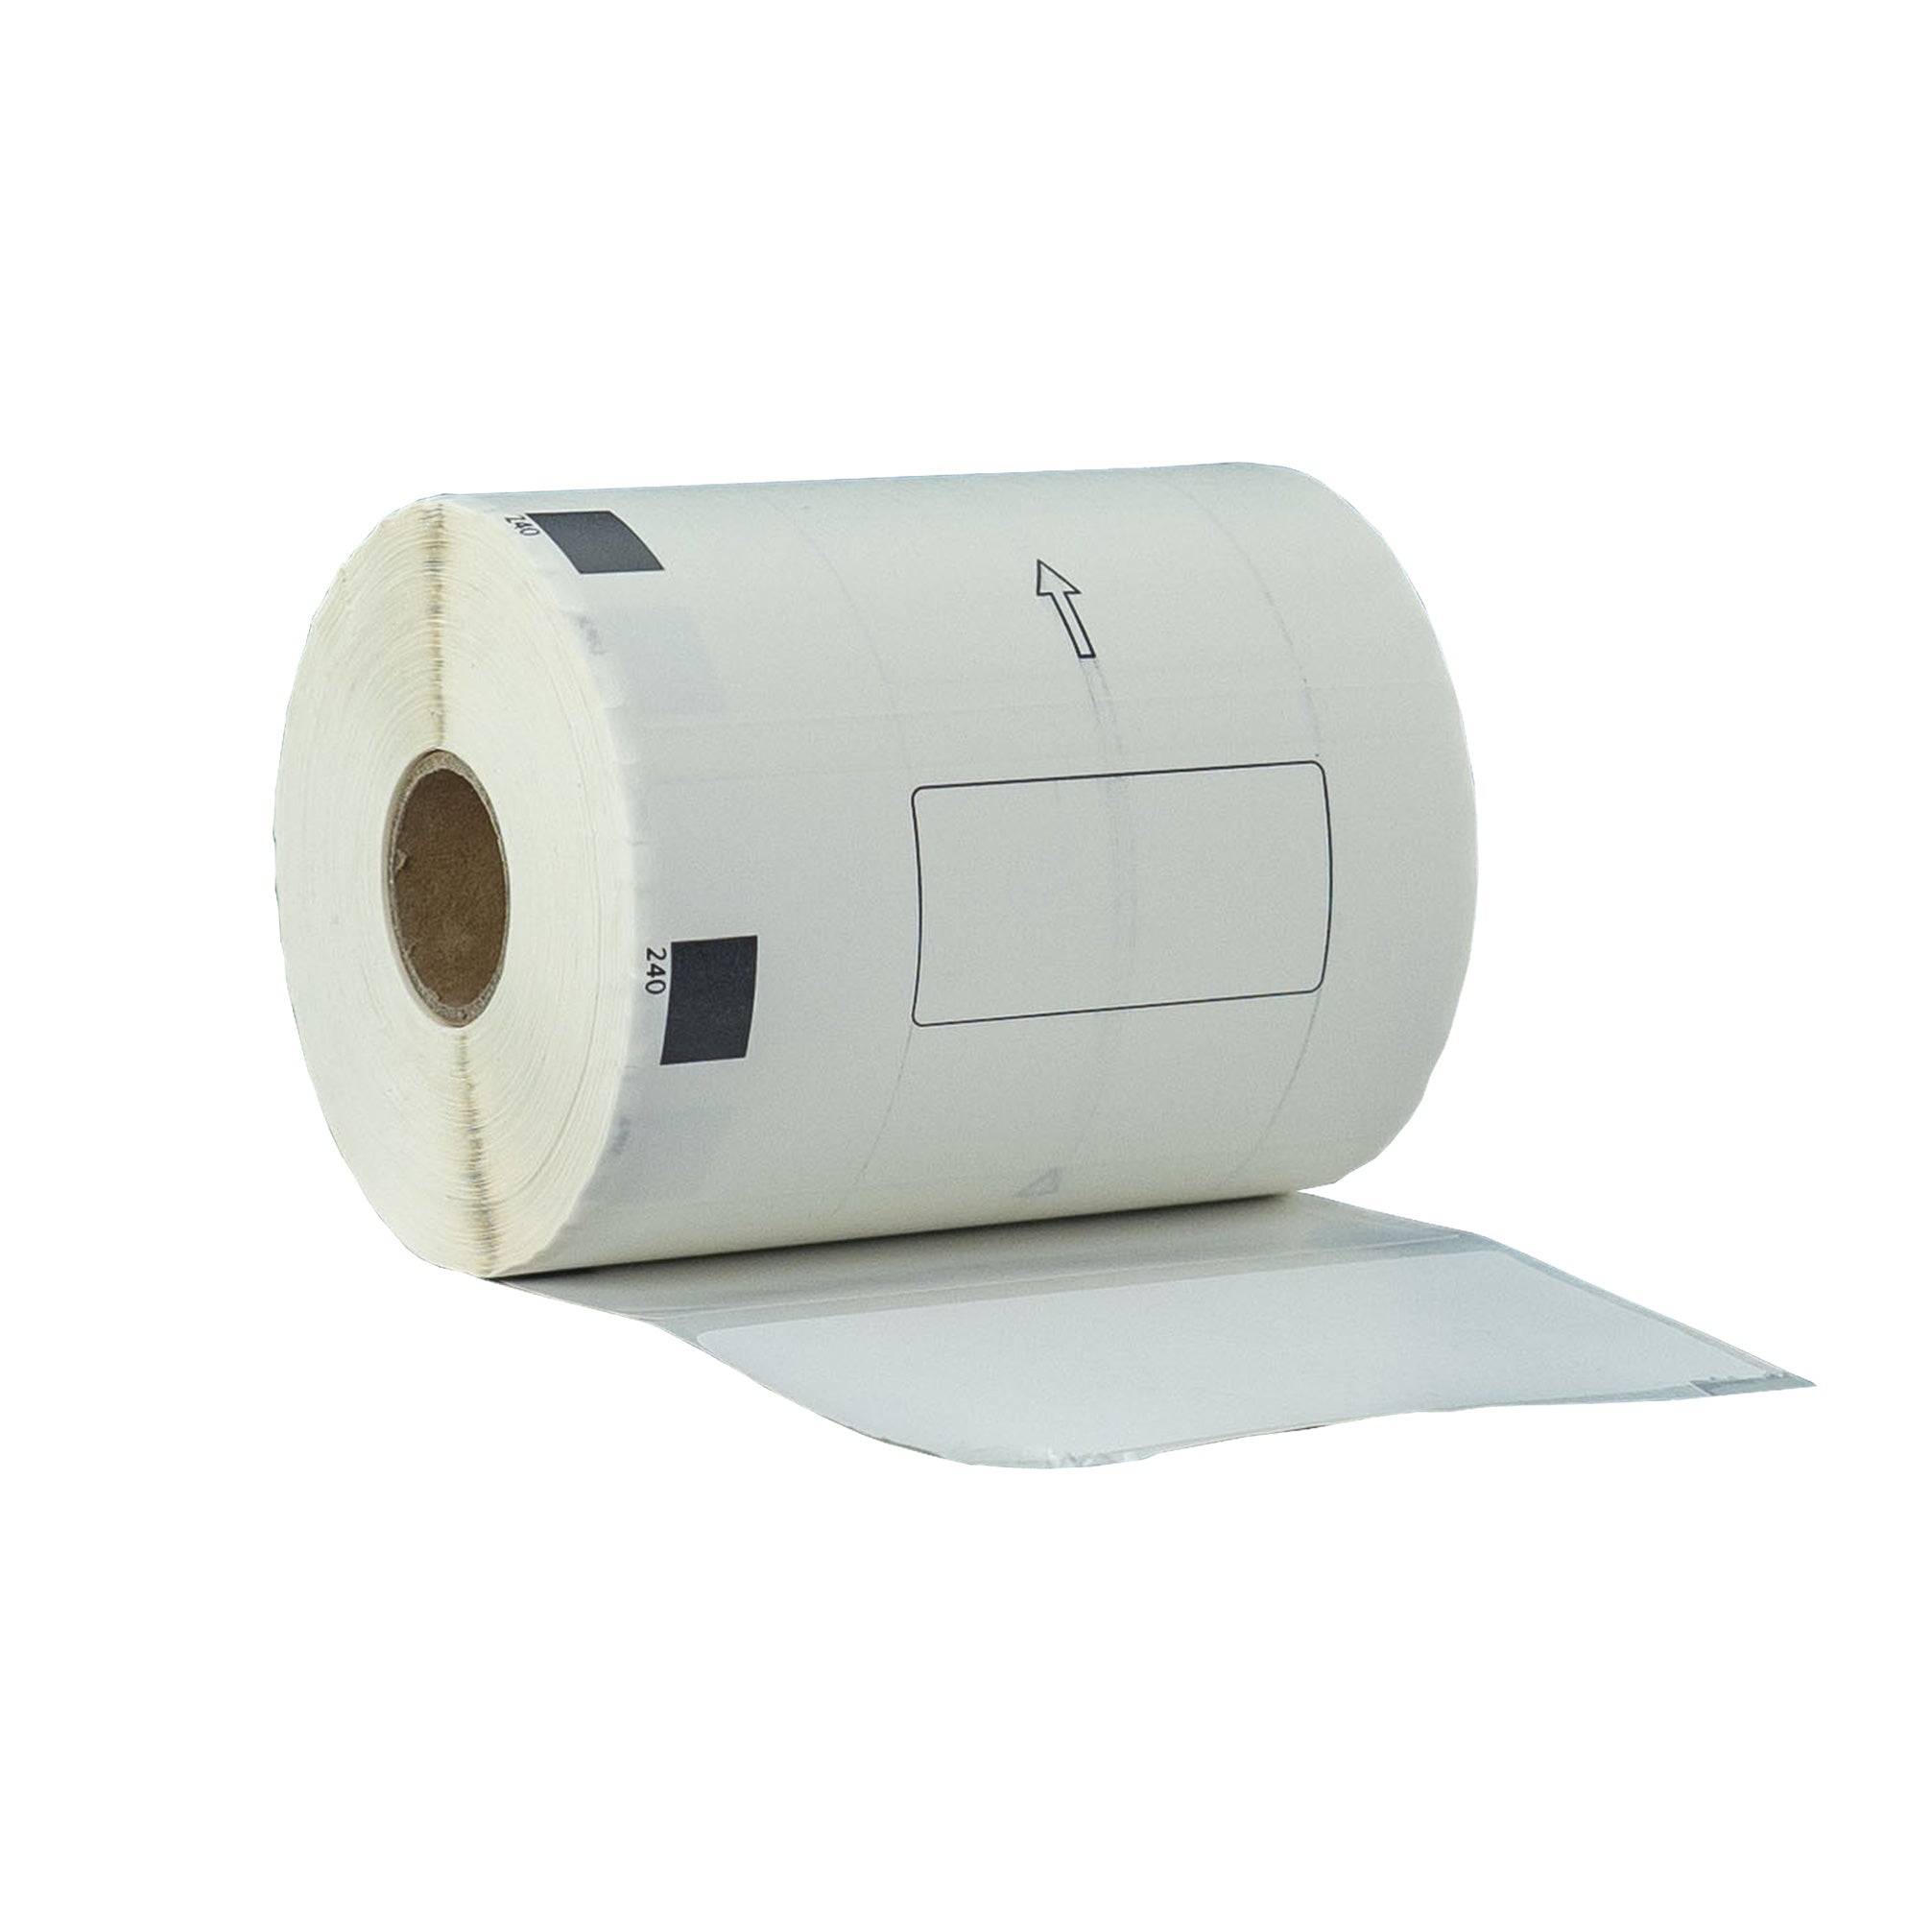 Compatible Brother DK-11240 Refill Labels 102 x 51mm/ 50 Rolls